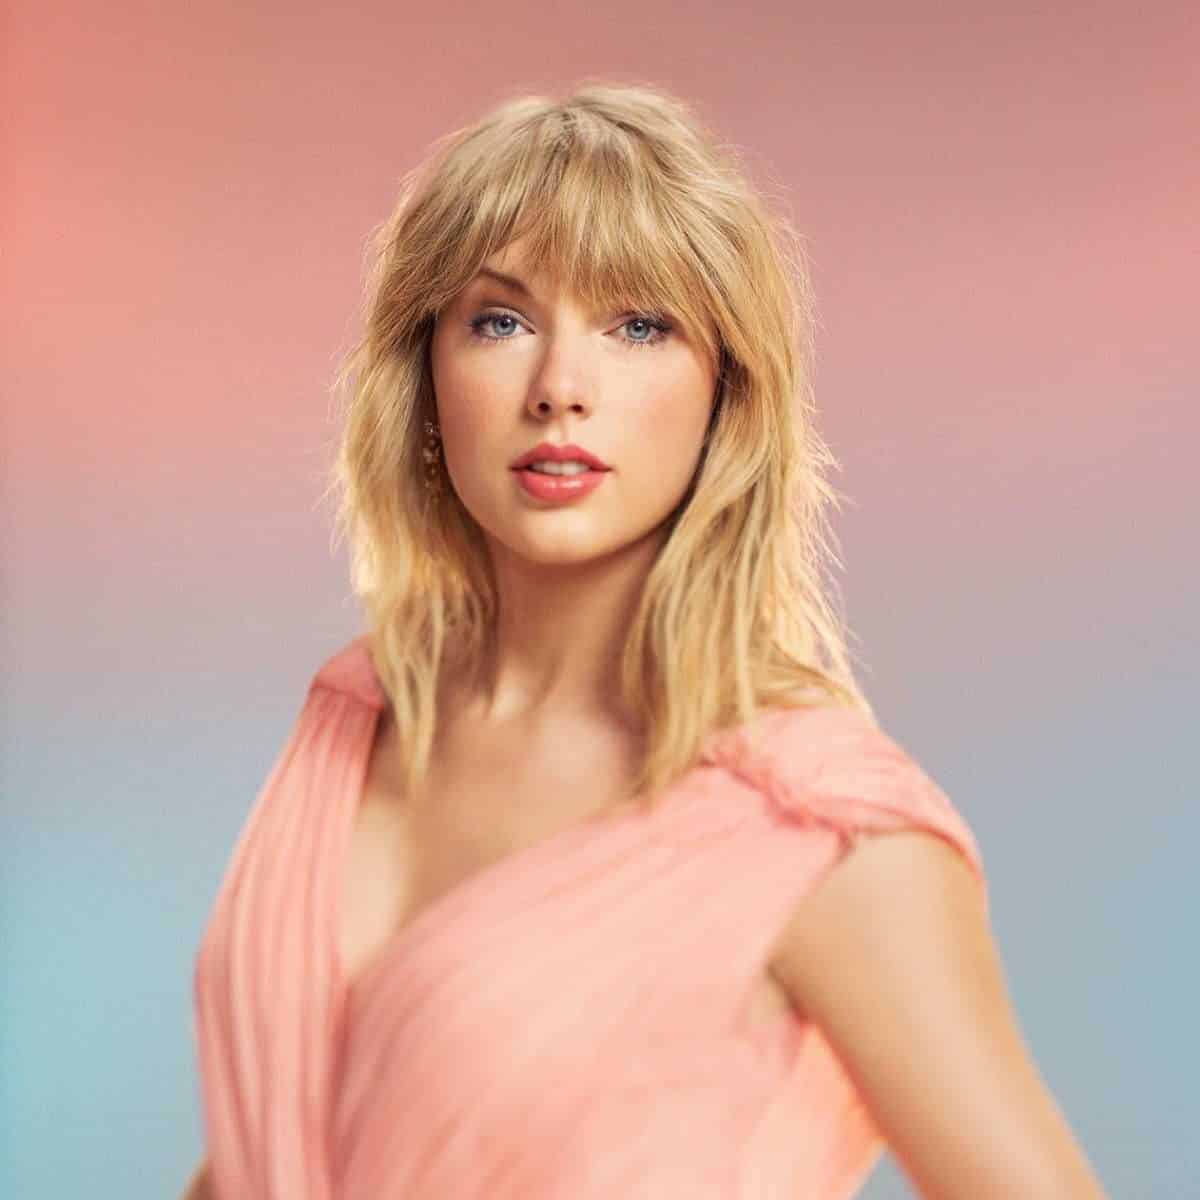 Taylor Swift's Net Worth Forbes